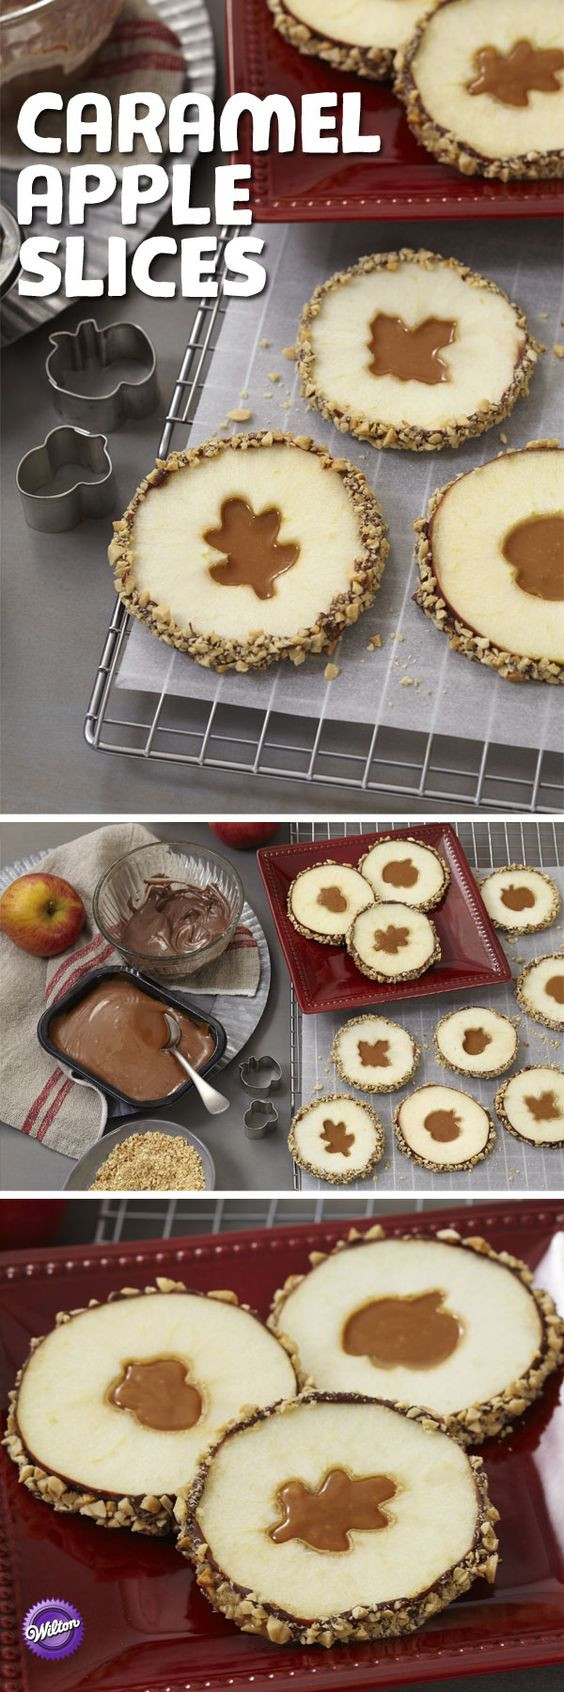 Light Fall Desserts
 The BEST Easy Fall Harvest and Winter Desserts & Treats